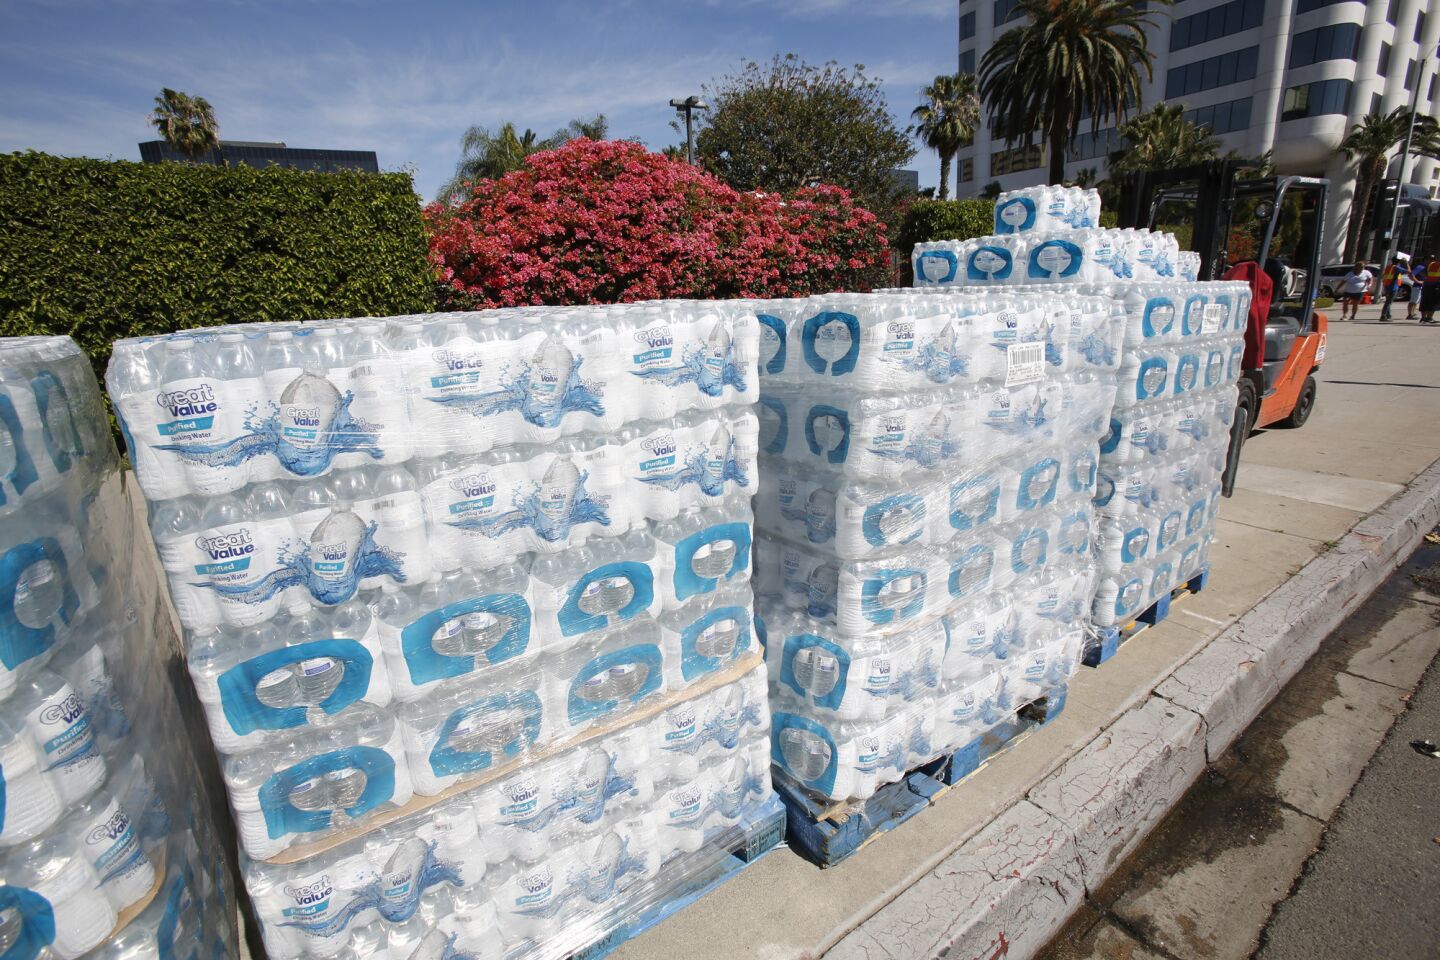 Bottles of water are ready to be distributed near the L.A. Marathon finish line on Ocean Avenue.